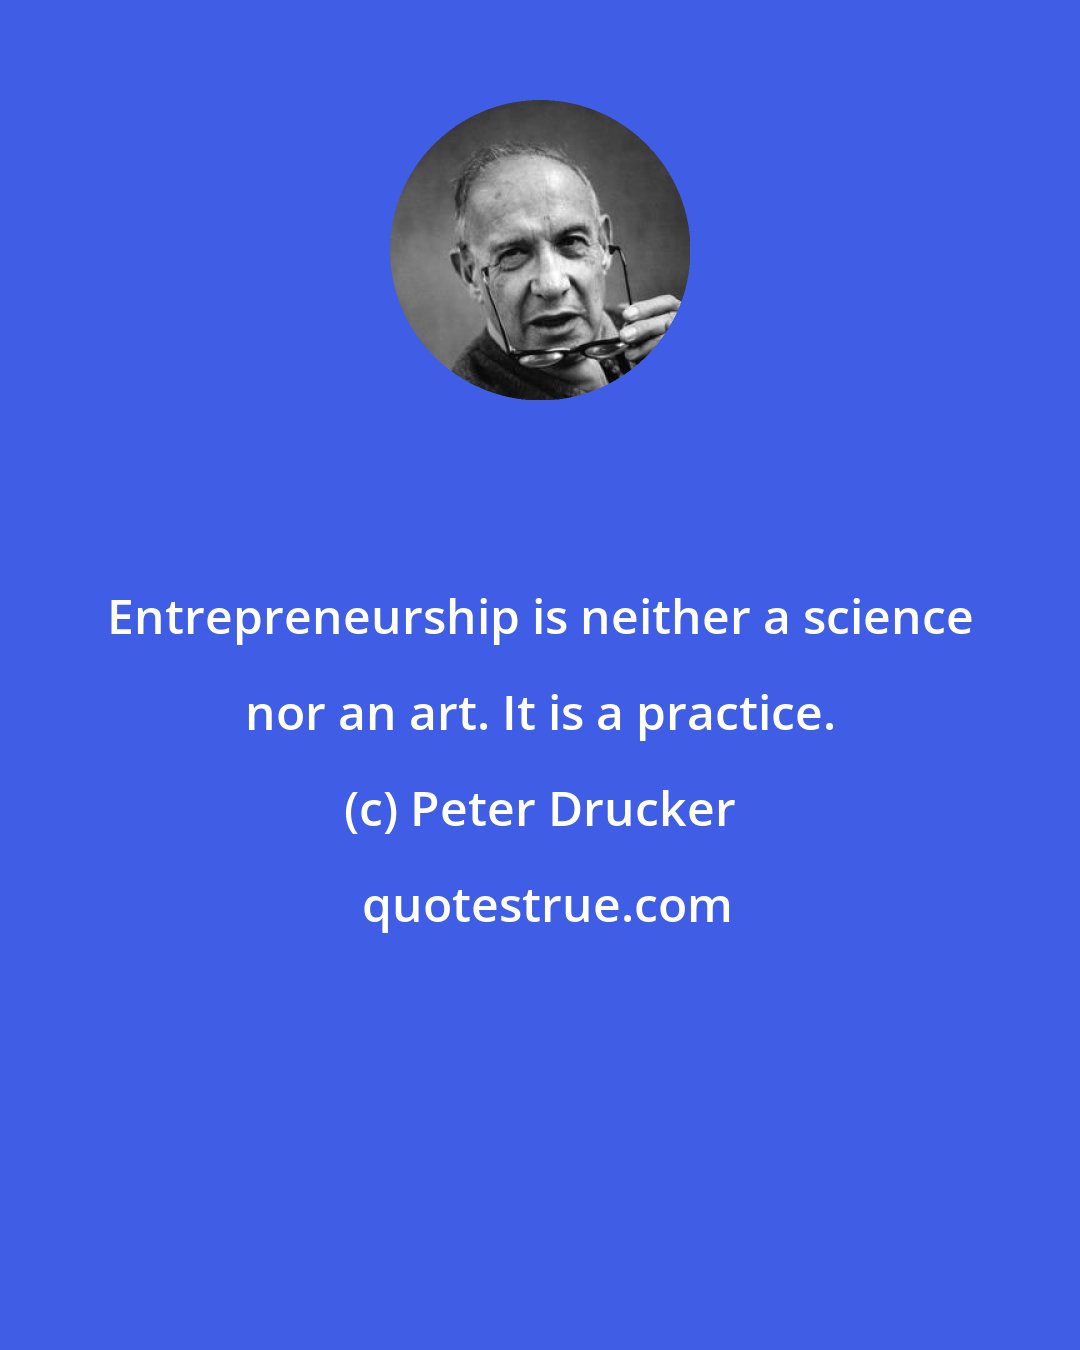 Peter Drucker: Entrepreneurship is neither a science nor an art. It is a practice.